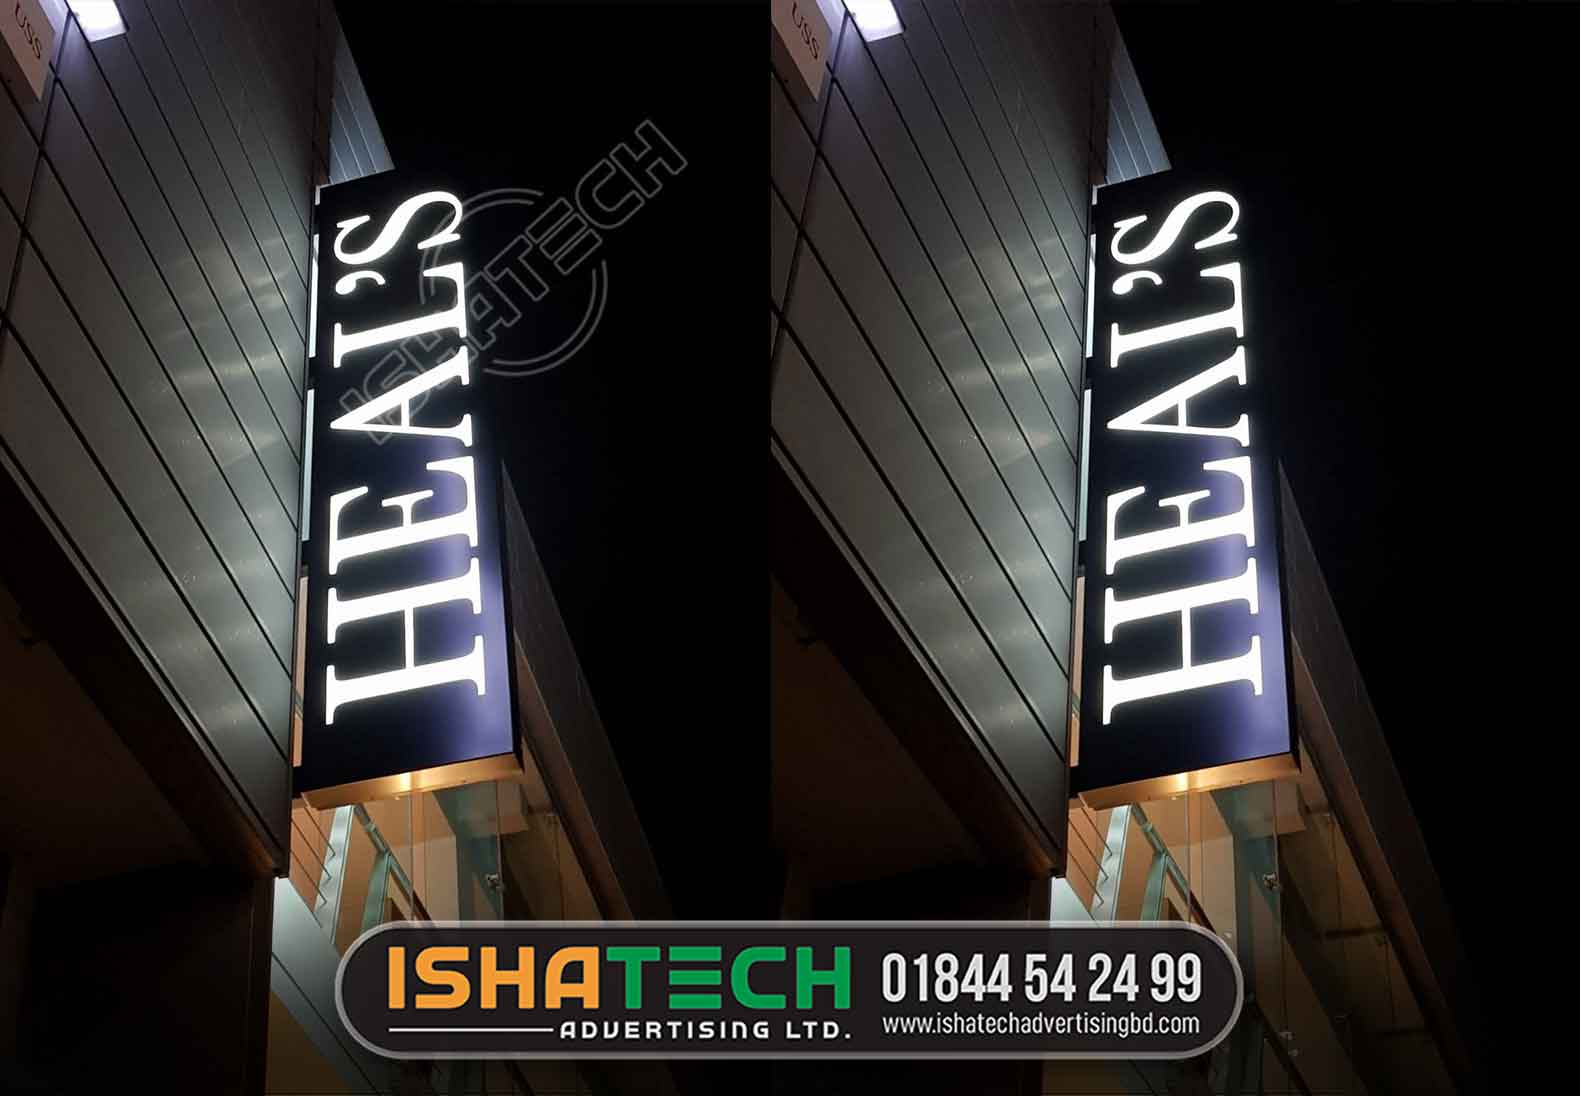 HEALS VERTICAL ACRYLIC LETTER SIGNAGE MAKER AND MANUFACTURER AGENCY IN DHAKA, BANGLADESH